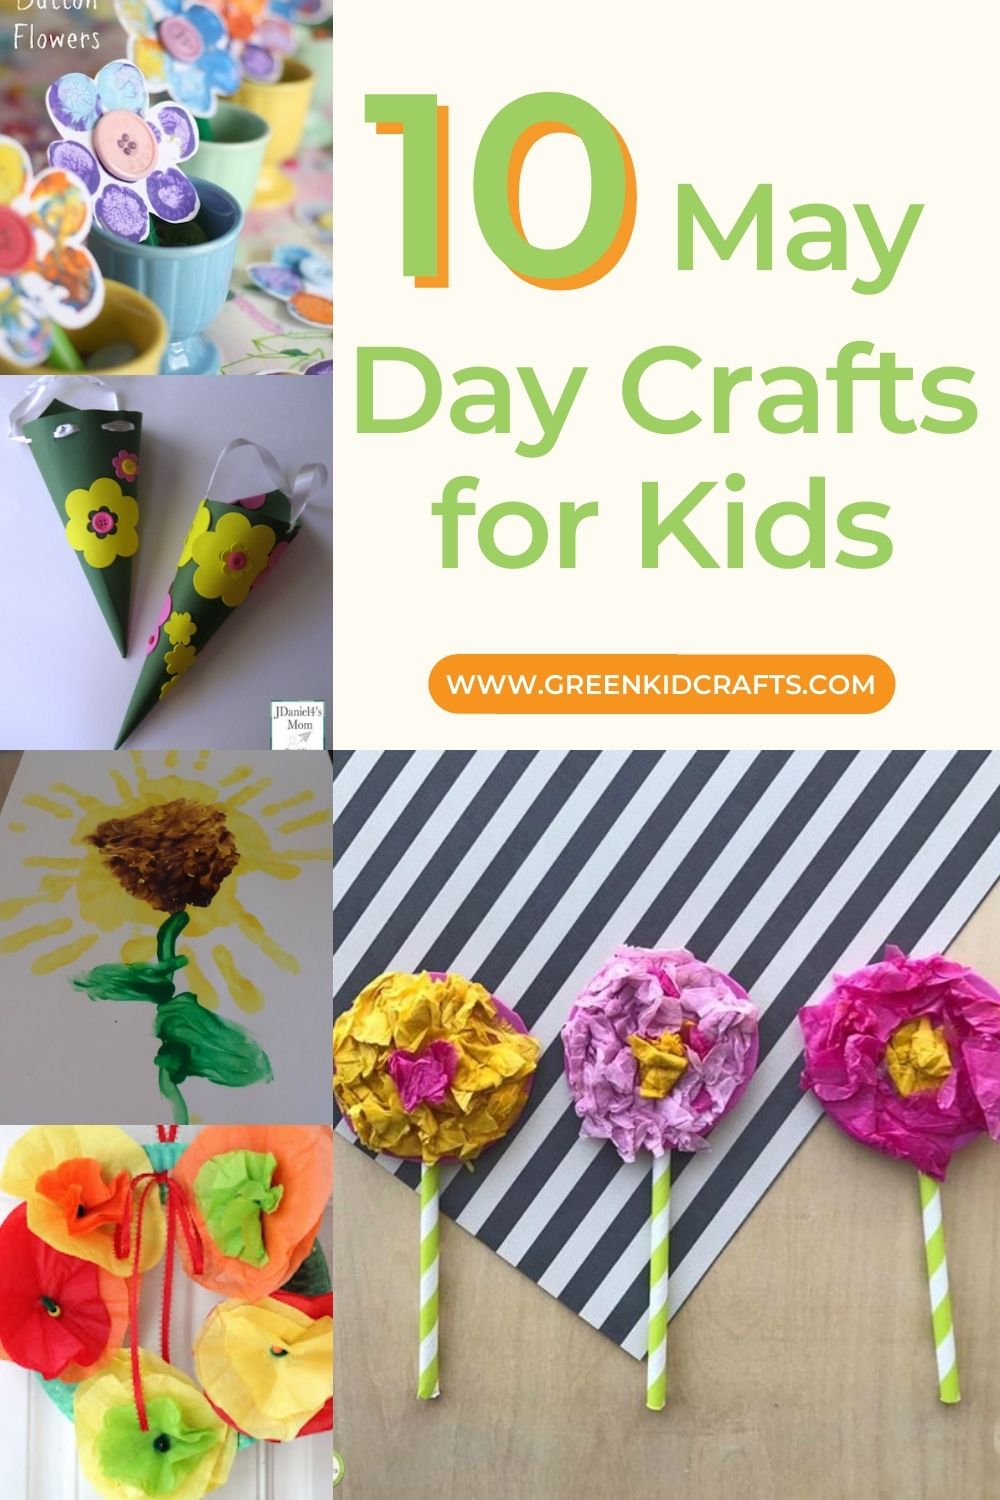 10 Fun May Day Craft Ideas for Kids – Green Kid Crafts